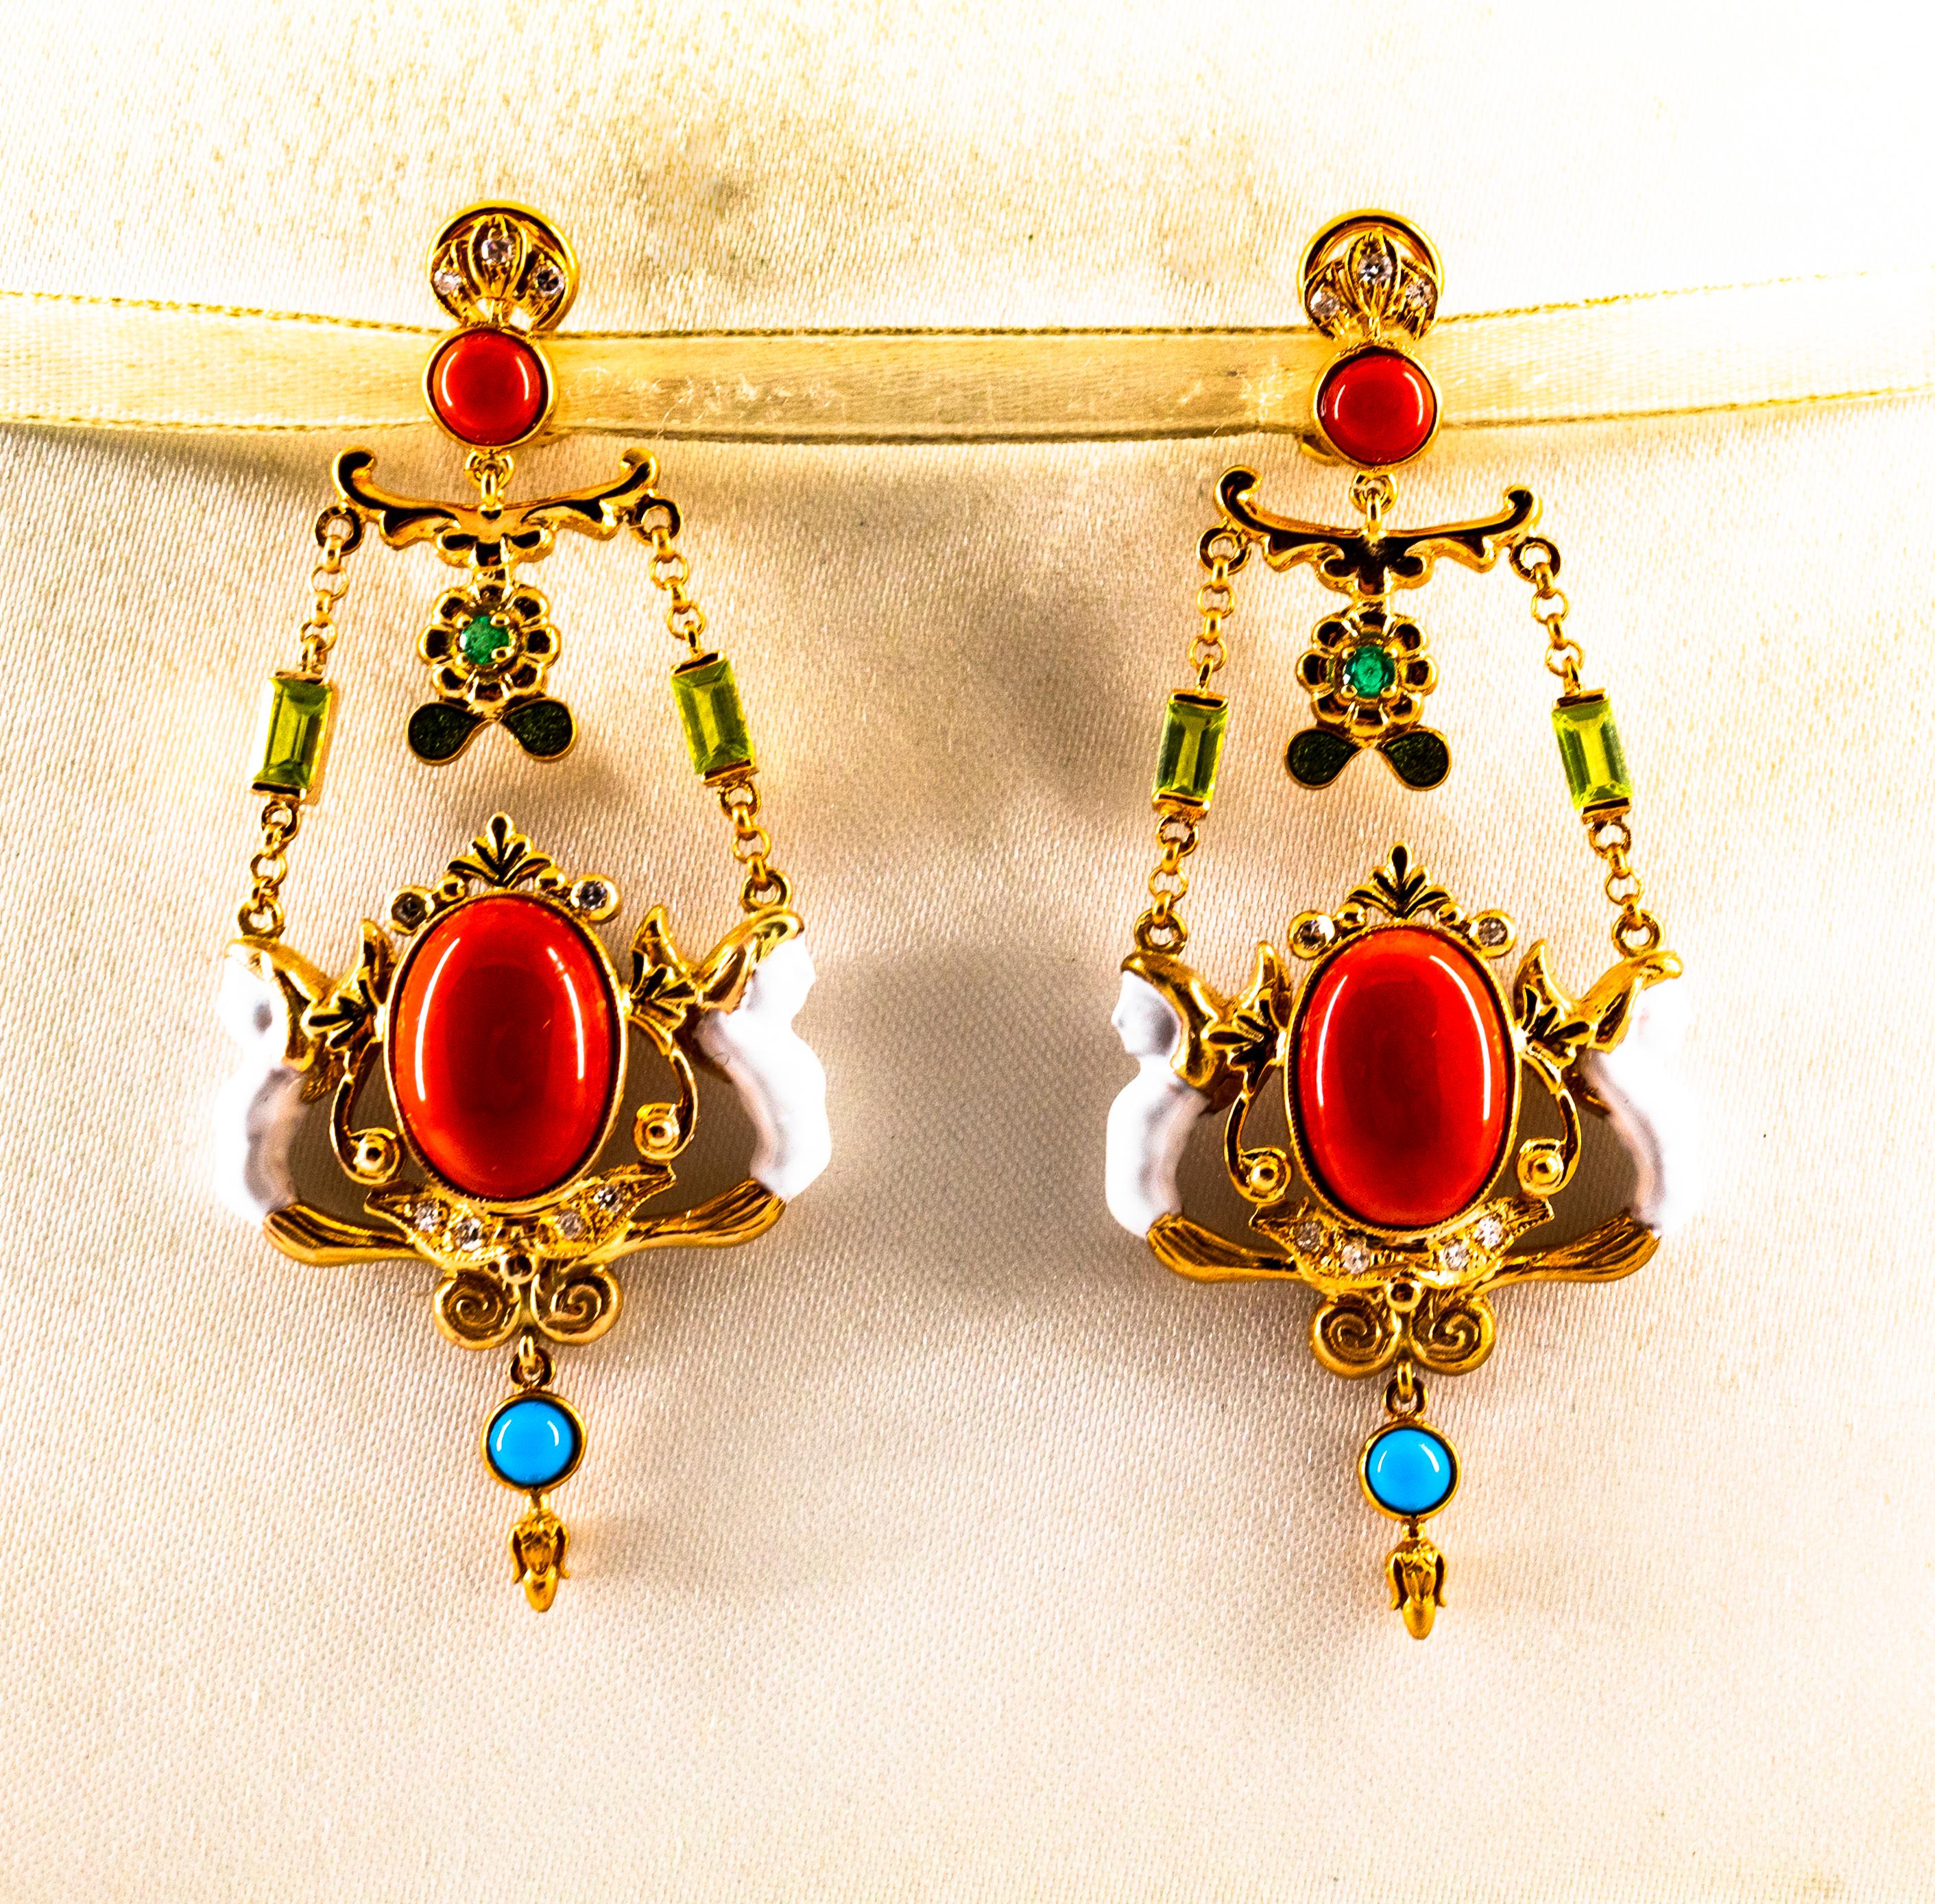 These Earrings are made of 9K Yellow Gold.
These Earrings have  0.30 Carats of White Modern Round Cut Diamonds.
These Earrings have 0.10 Carats of Emeralds.
These Earrings have 0.40 Carats of Peridots.
These Earrings have Mediterranean (Sardinia,